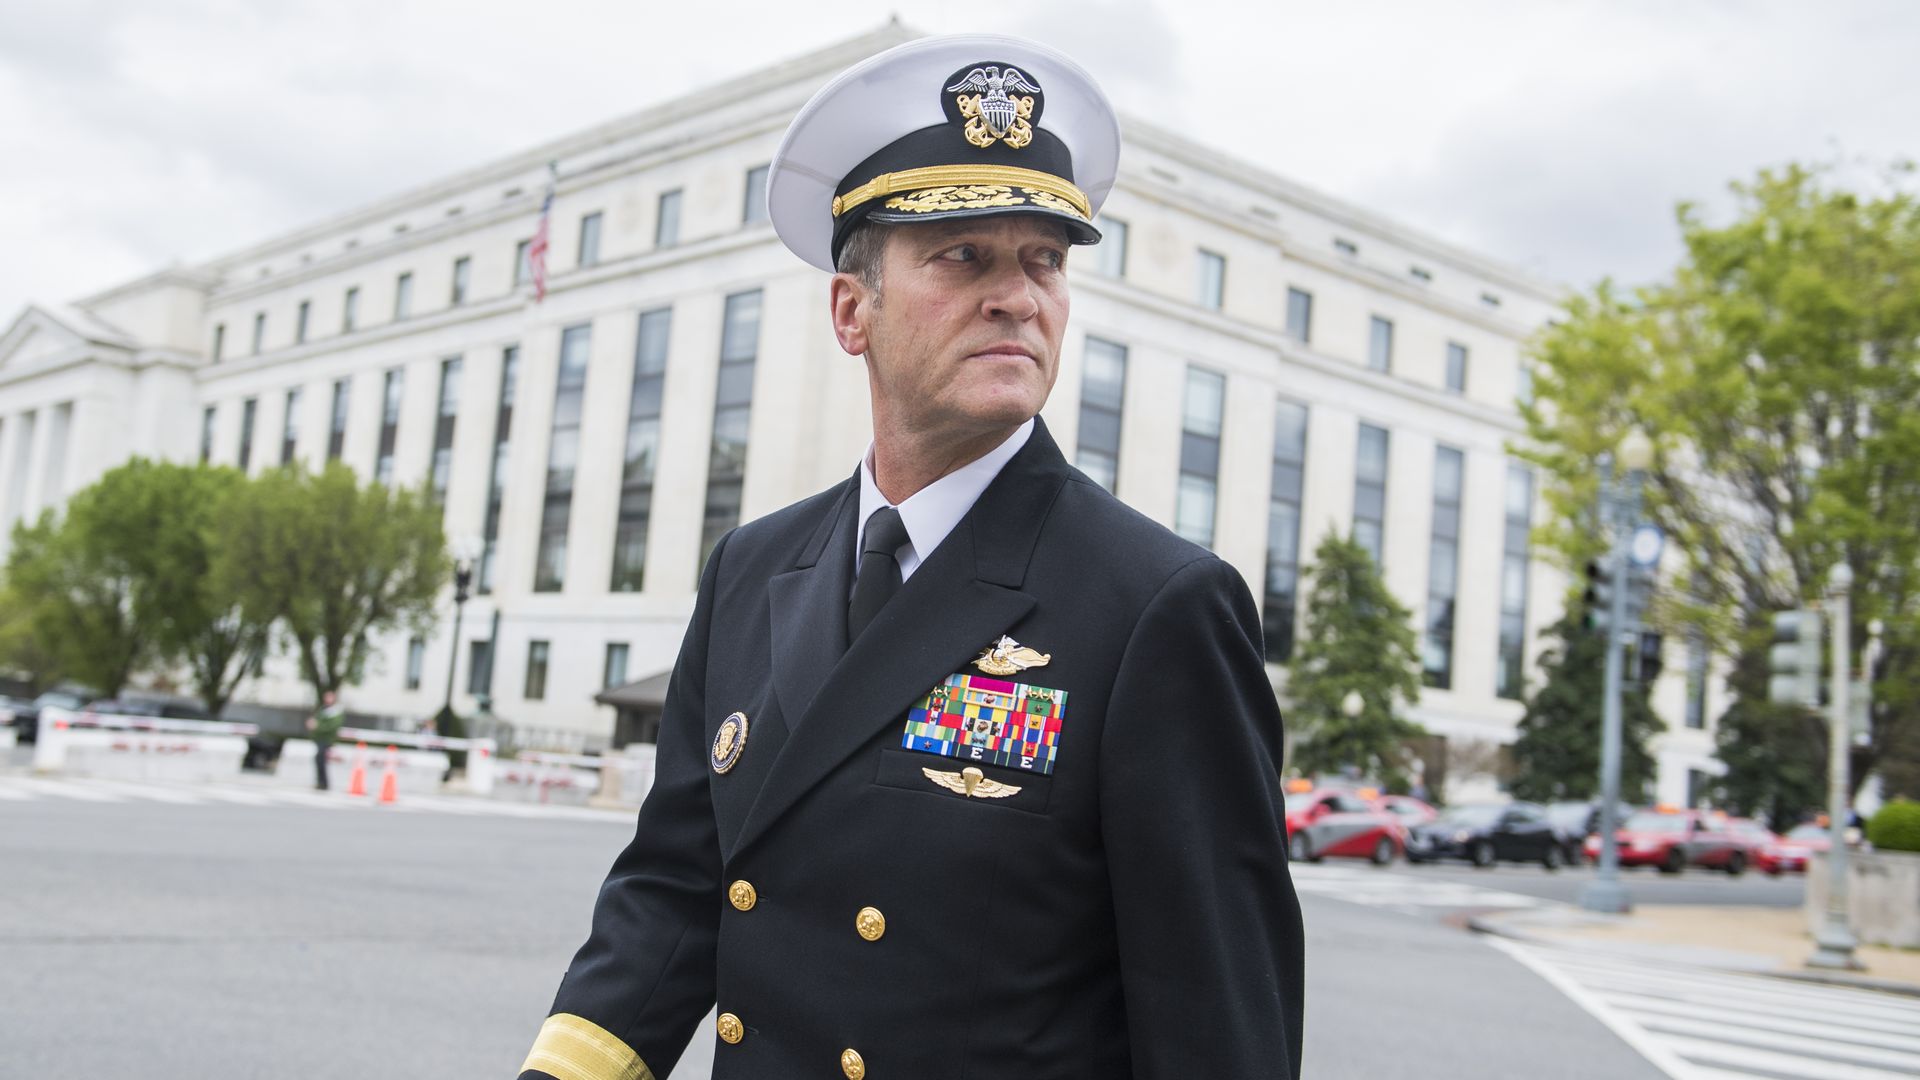 Rear Adm. Ronny Jackson, nominee for Veterans Affairs secretary, leaves Dirksen Building after a meeting on Capitol Hill.